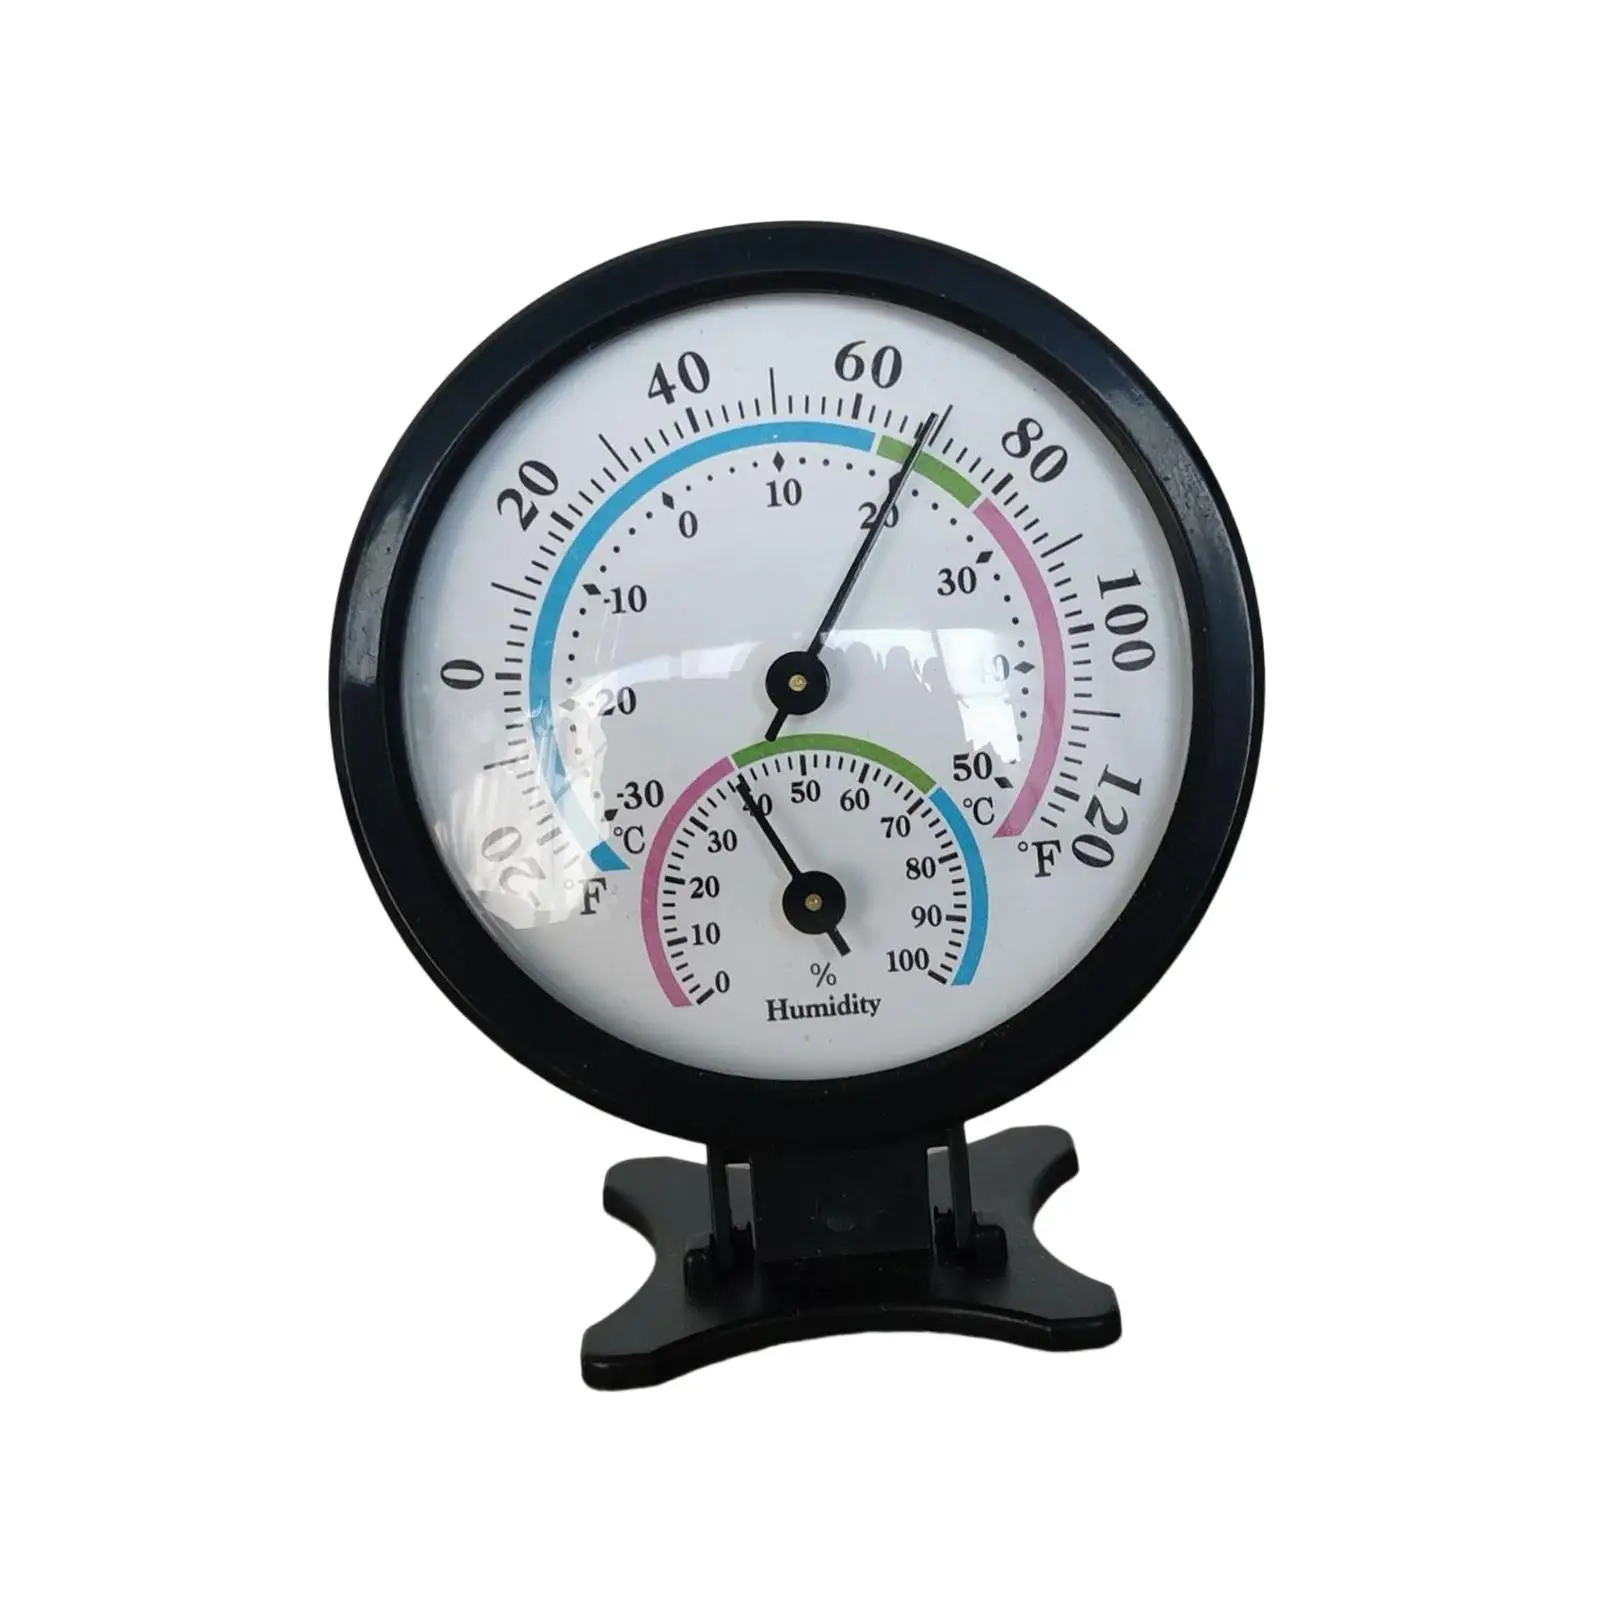 Thermometer Hygrometer Wall Mounted Desk High Accuracy Portable Measurement Tool